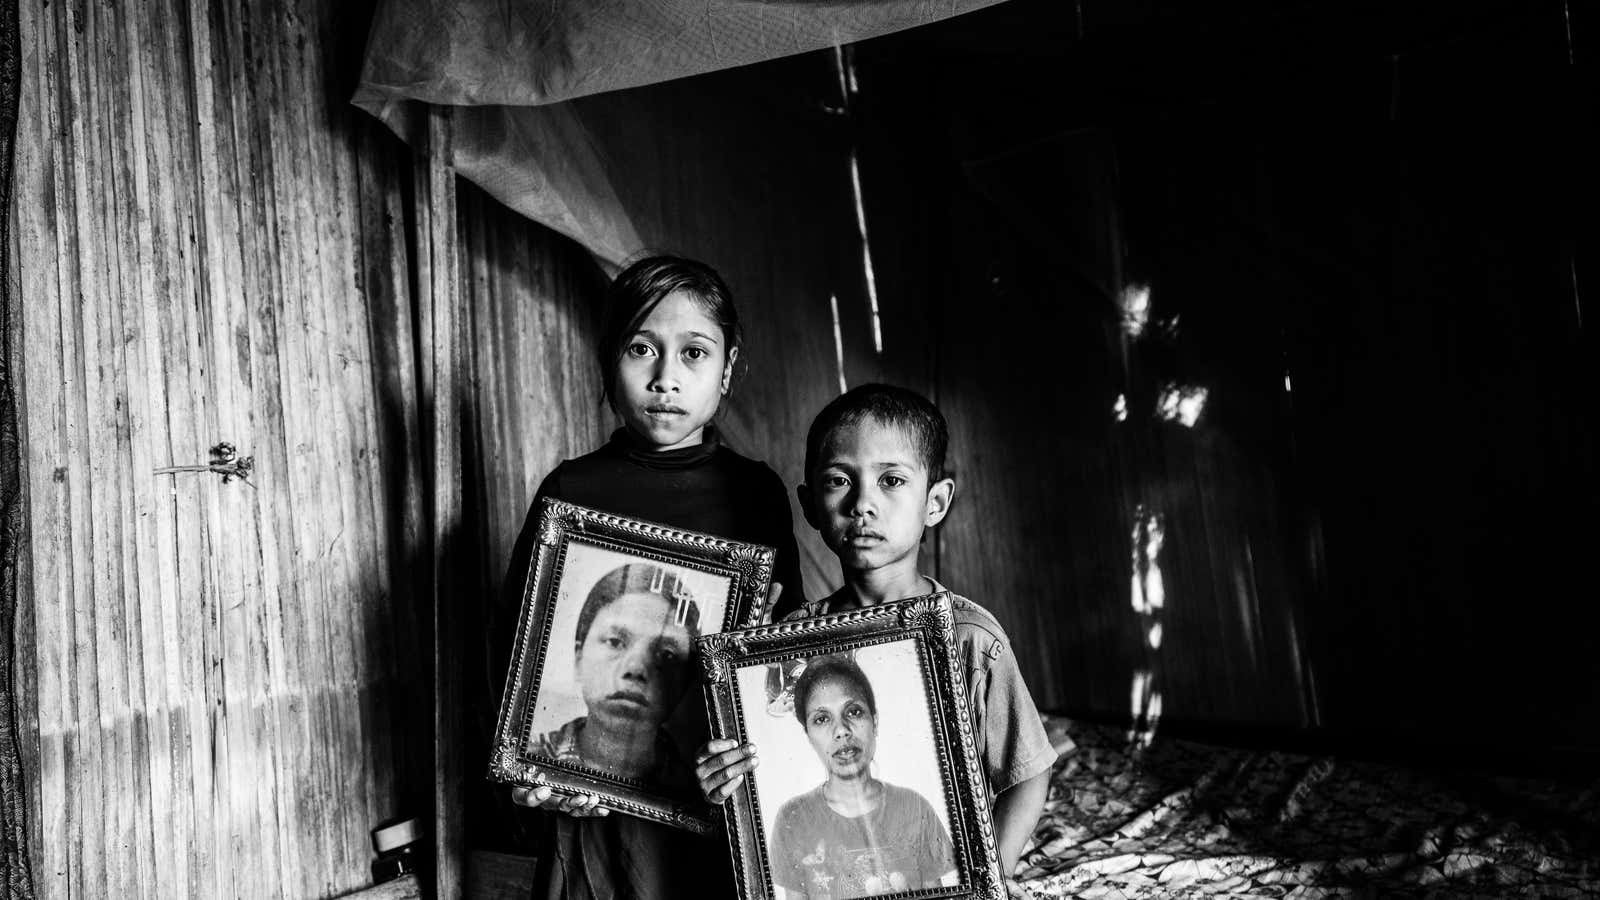 Dolfina’s children Erna and Julius hold photos of their mother inside their hut in East Nusa Tenggara, Indonesia. They now live with their grandfather Mikhael.